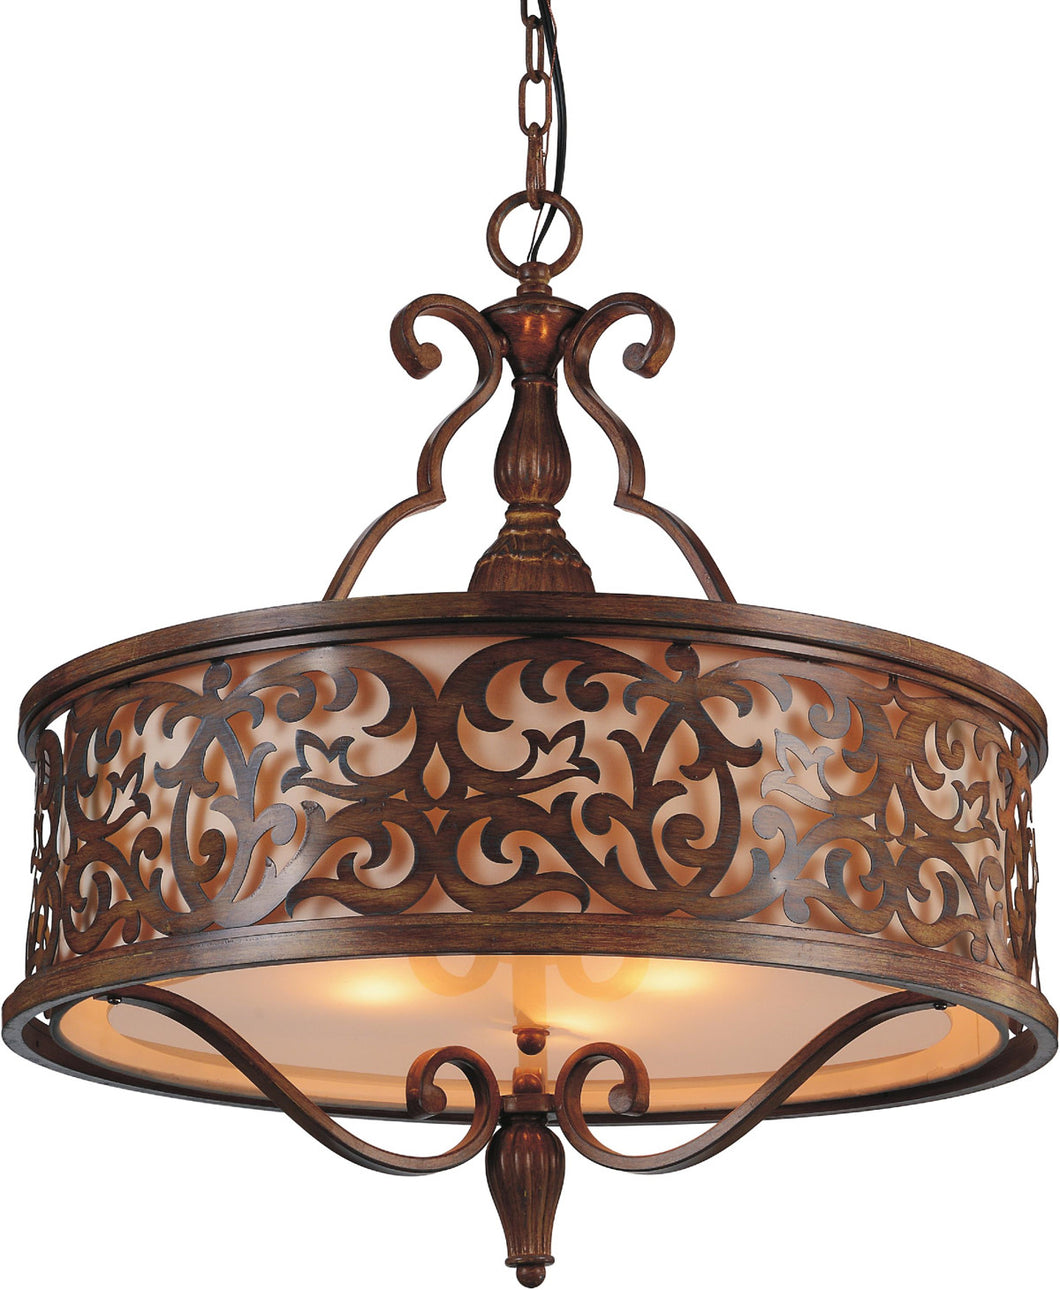 5 Light Drum Shade Chandelier with Brushed Chocolate finish